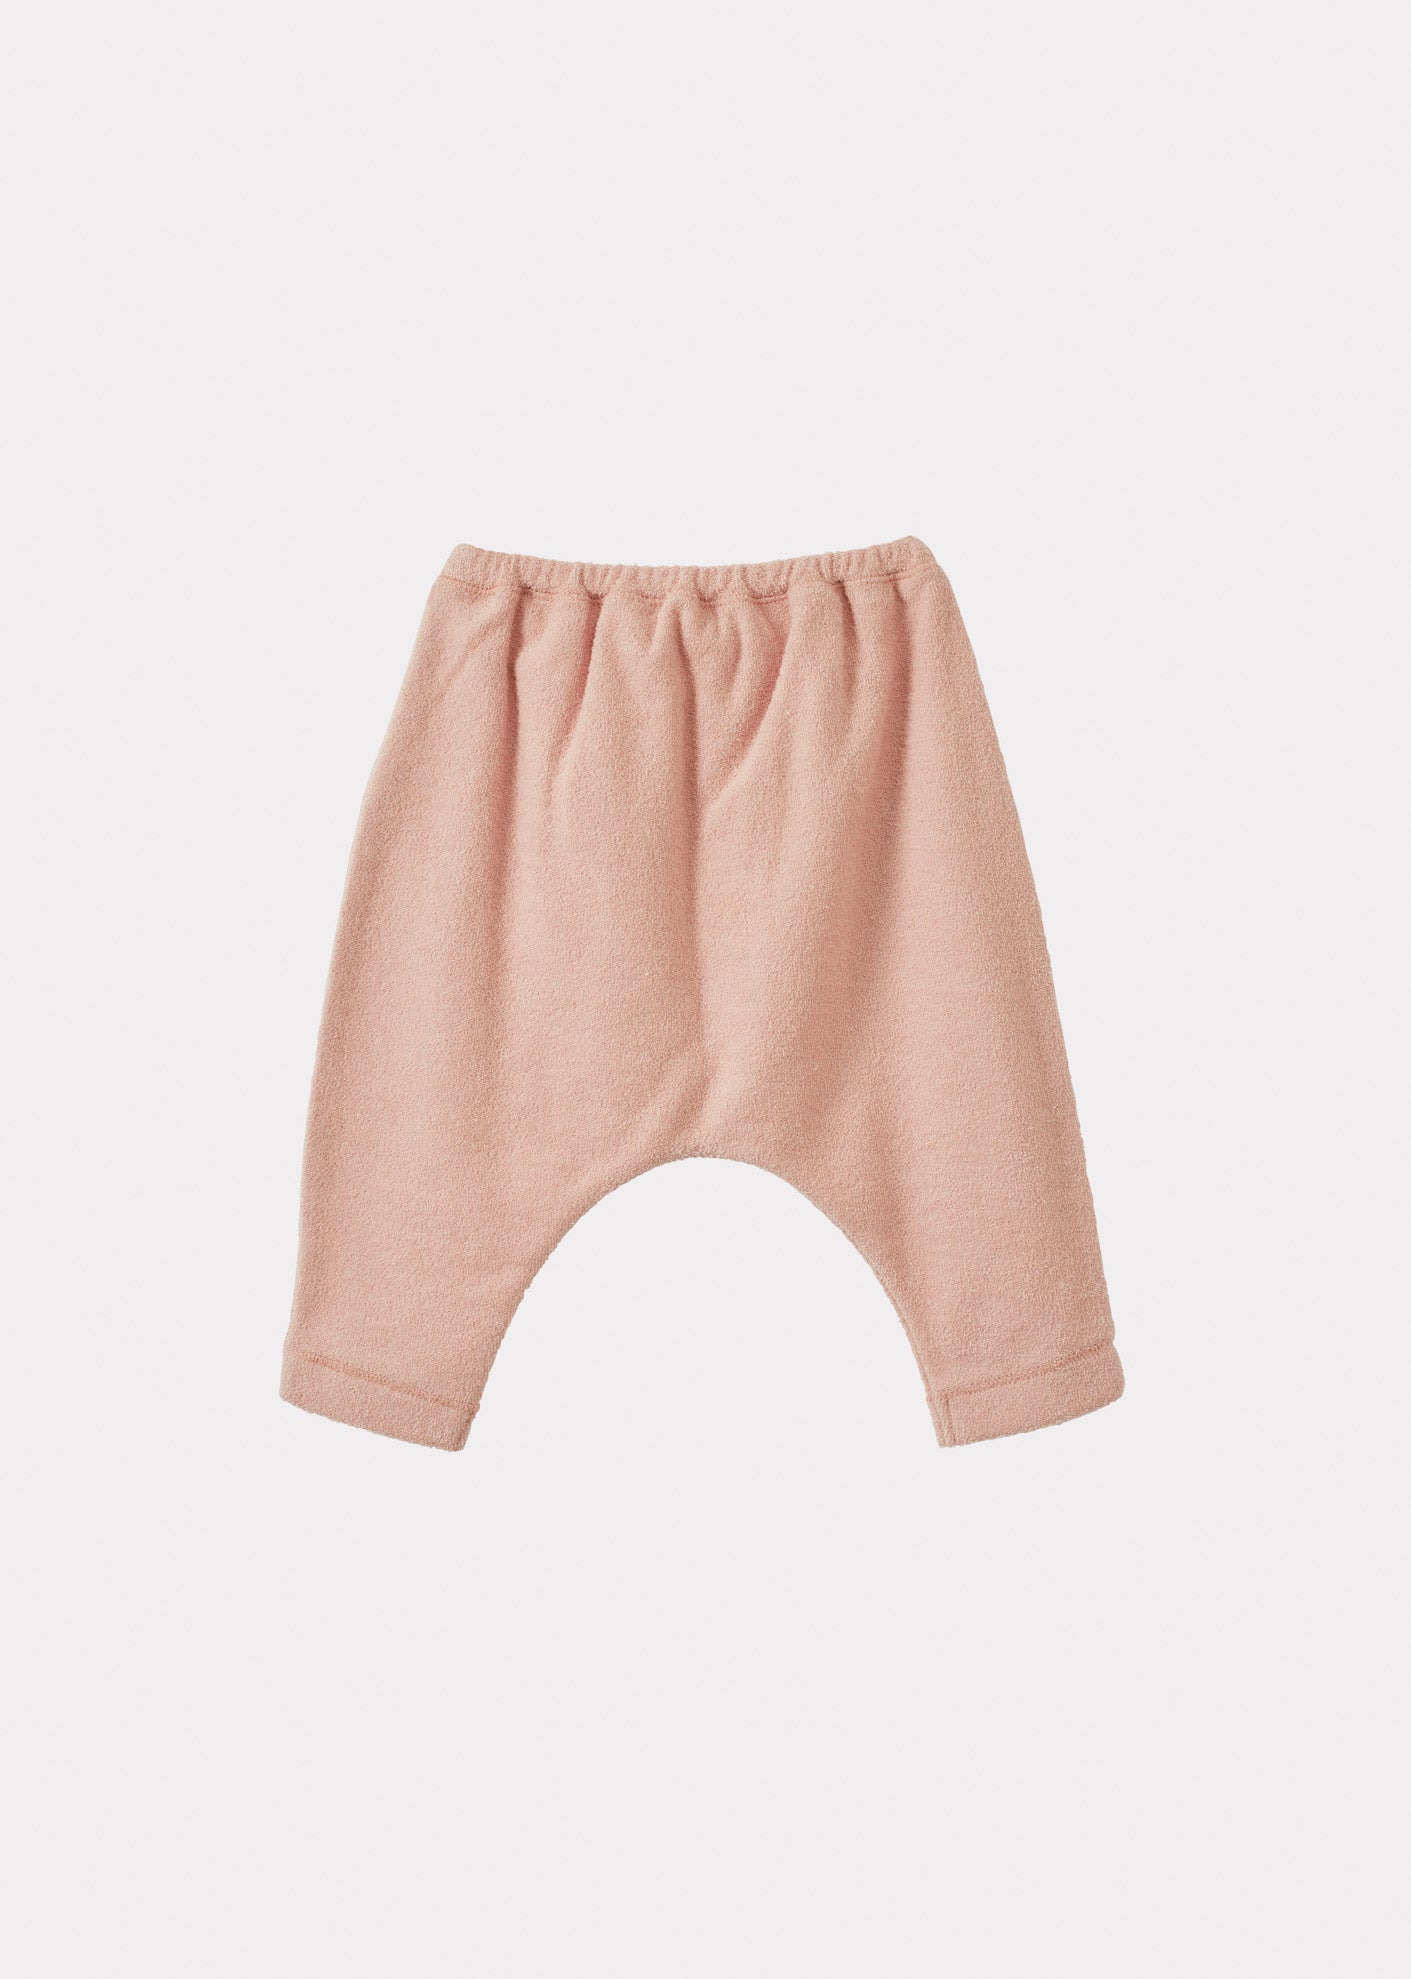 CLEMATIS BABY GIFTING TROUSER - CALAMINE 